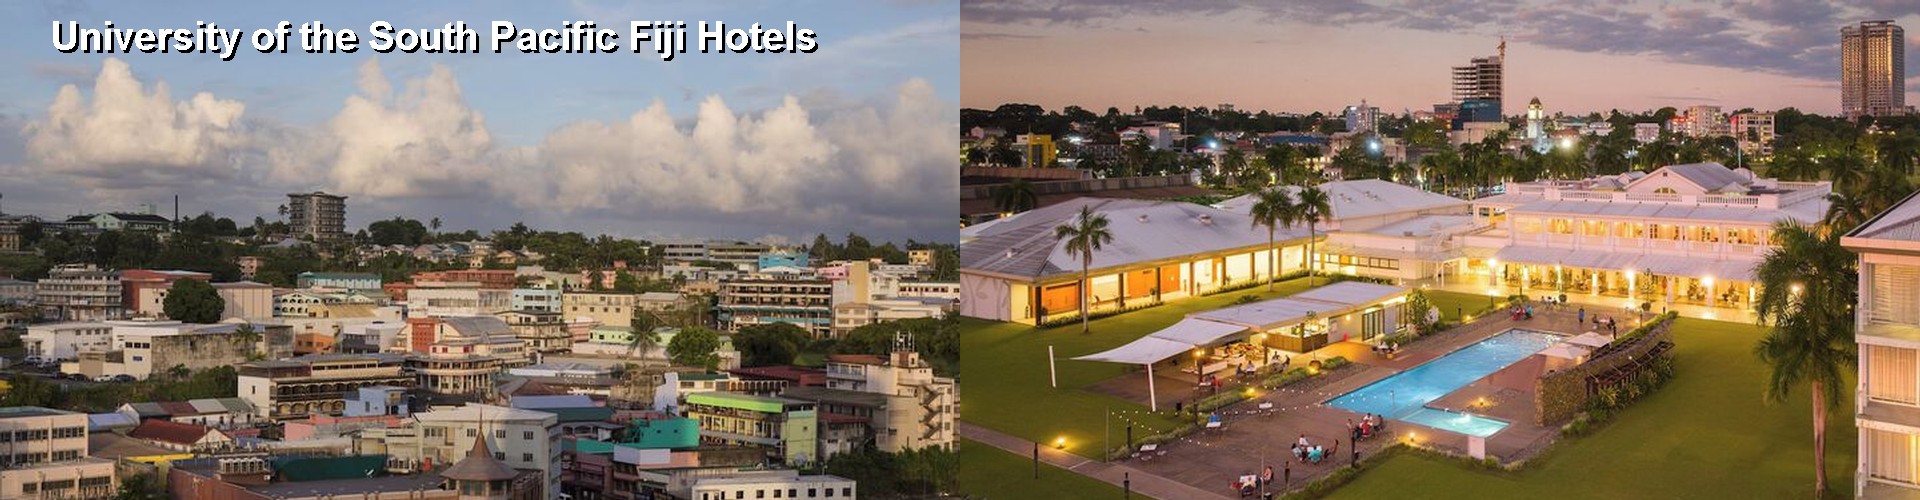 3 Best Hotels near University of the South Pacific Fiji